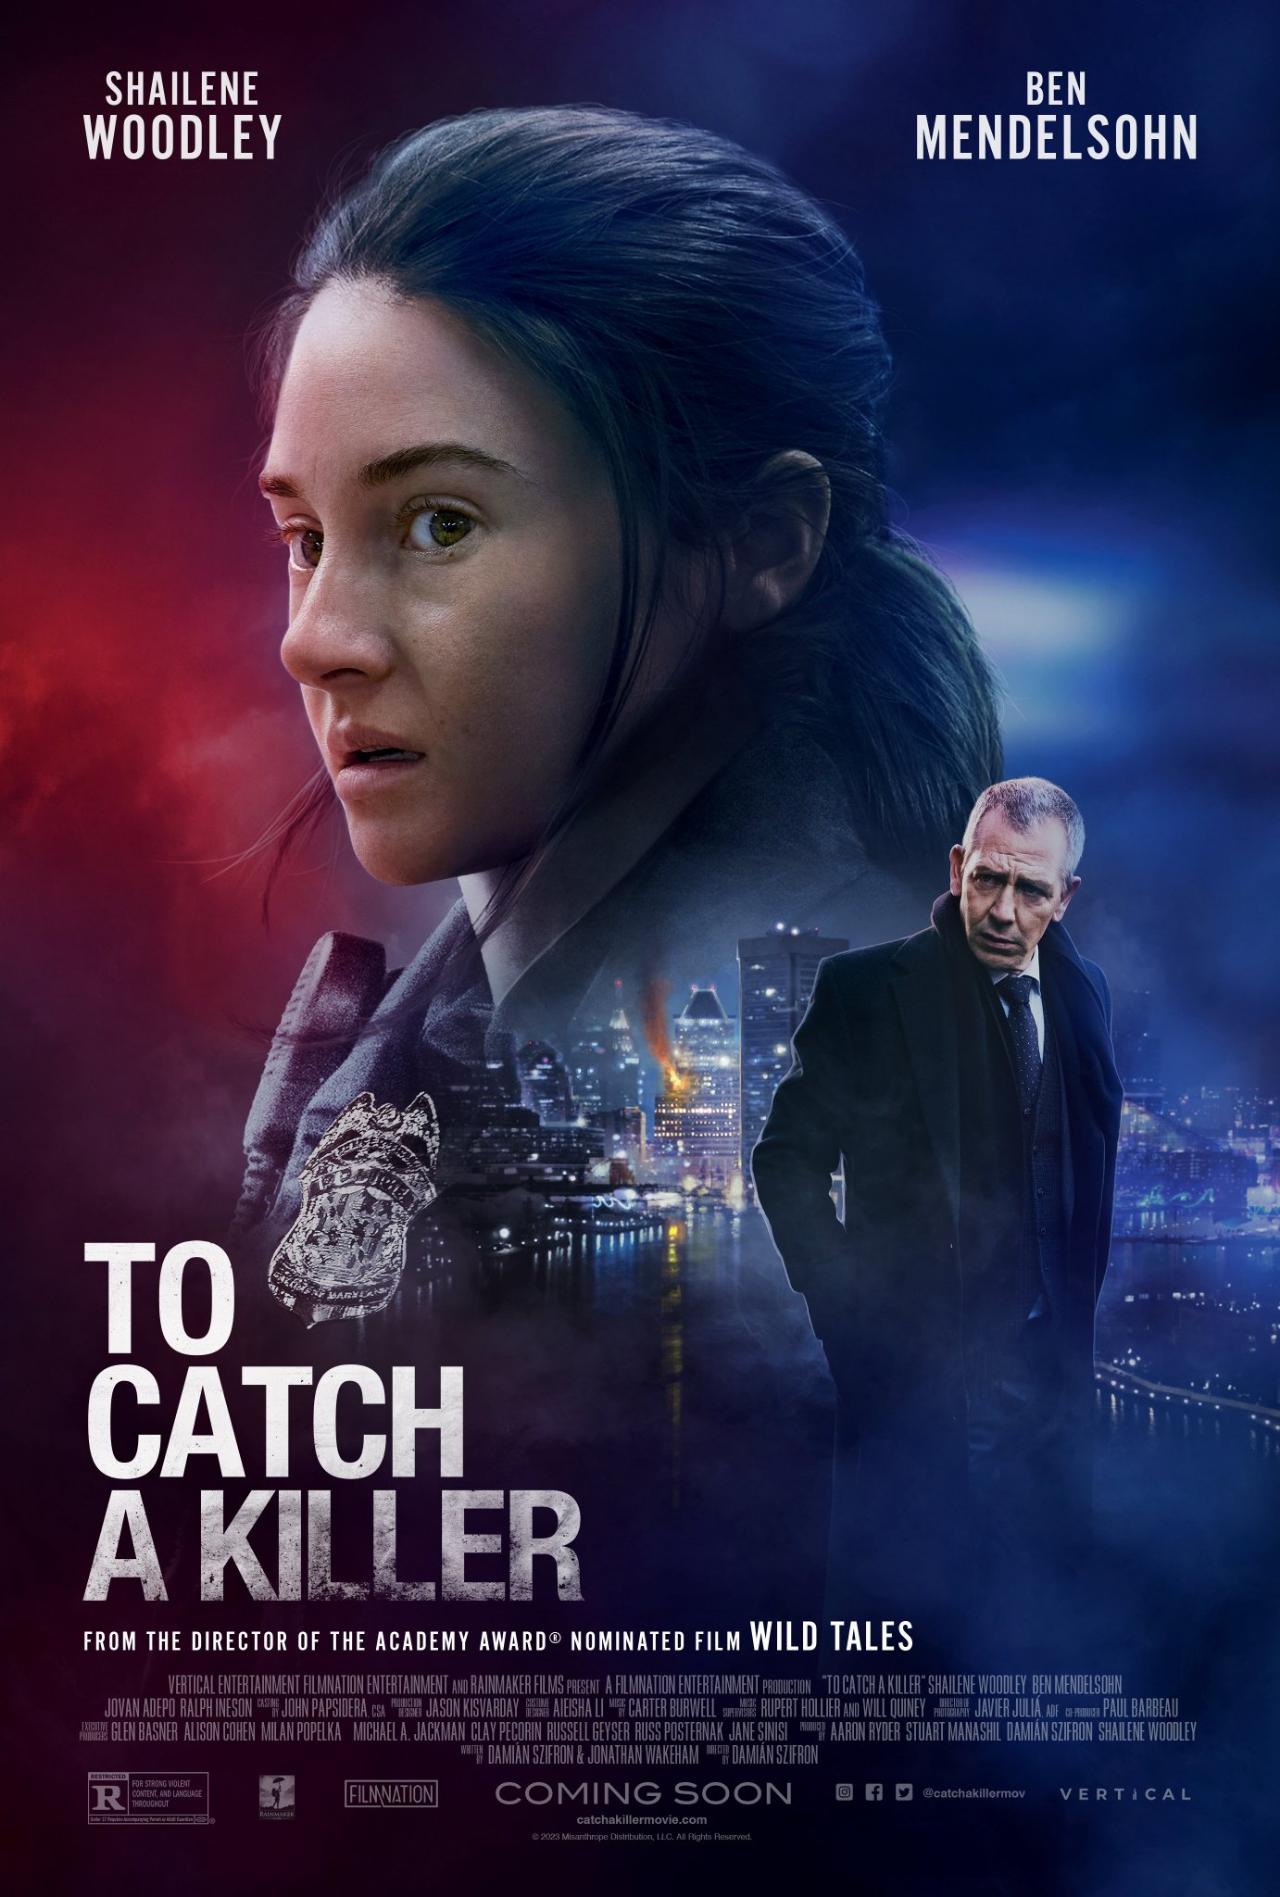 To Catch a Killer: A murderer is on the loose, and the clock is ticking fast on the next victim’s life span. Starring Shailene Woodley, the mystery thriller 'To Catch A Killer' follows a police officer's quest of catching a serial killer after being assigned to it by the FBI’s Chief, all the while fighting some personal demons. You simply cannot miss the thrill of the chase that this film offers! The film is slated to release on May 12.